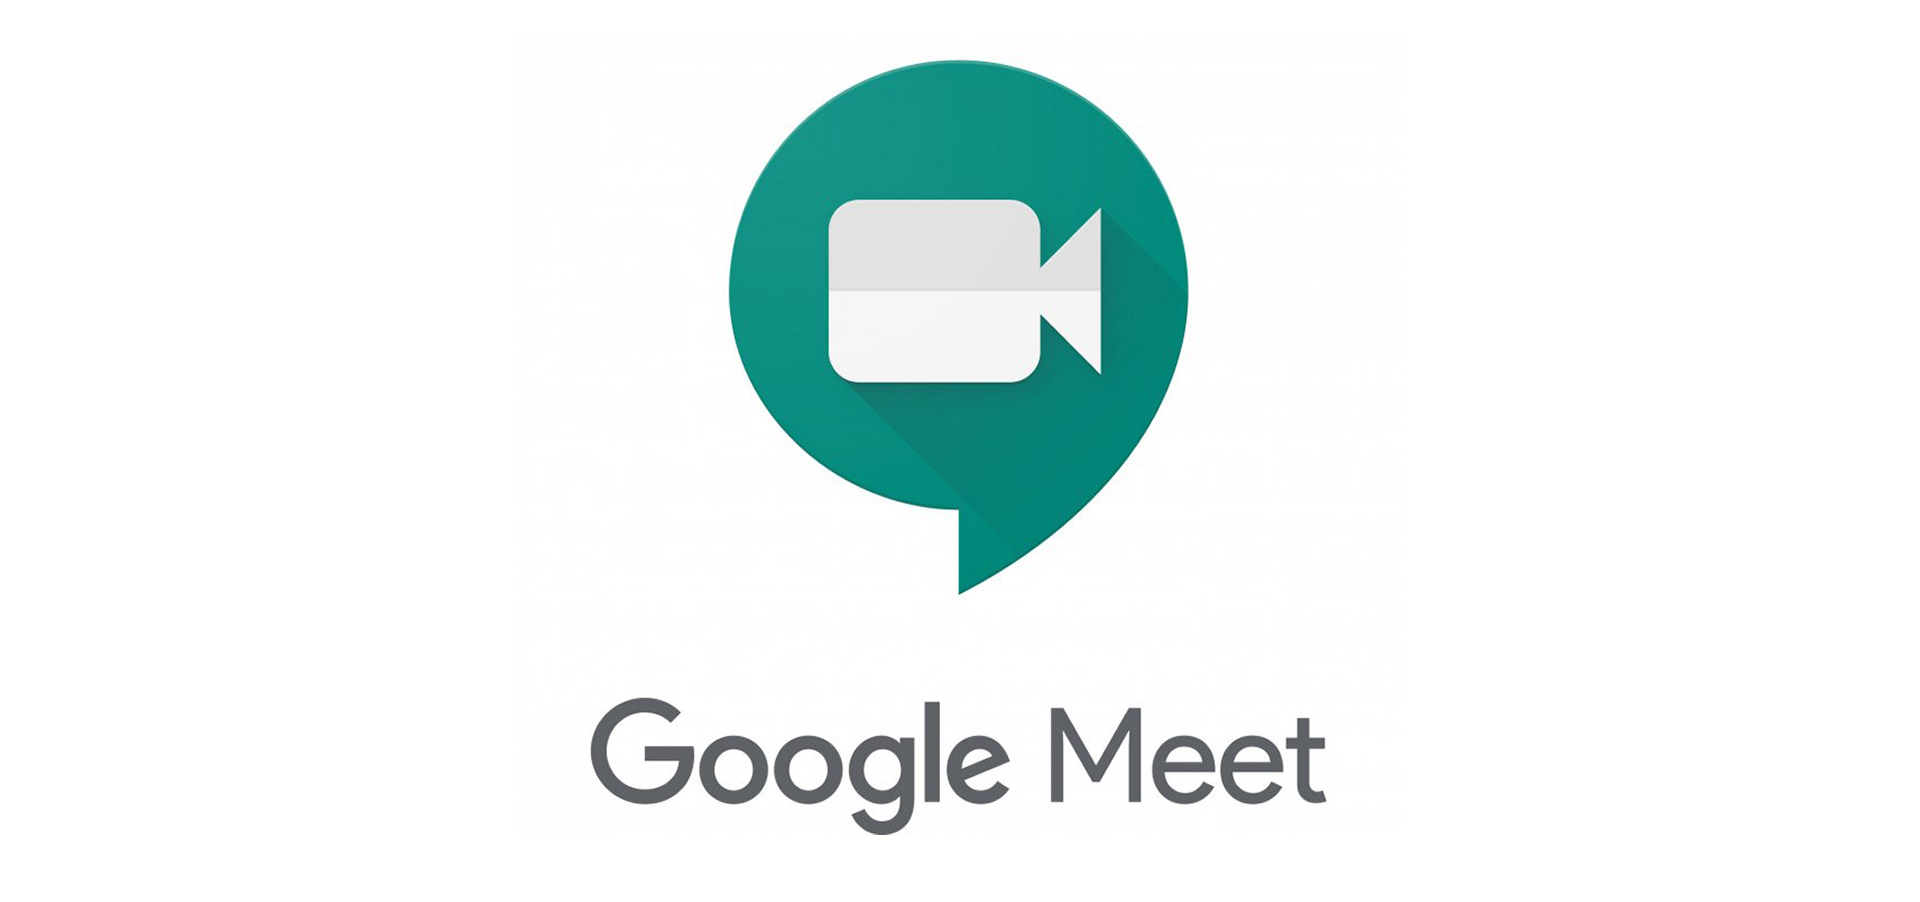 Google Meet to limit meetings to 60 minutes on free plans after Sept 30